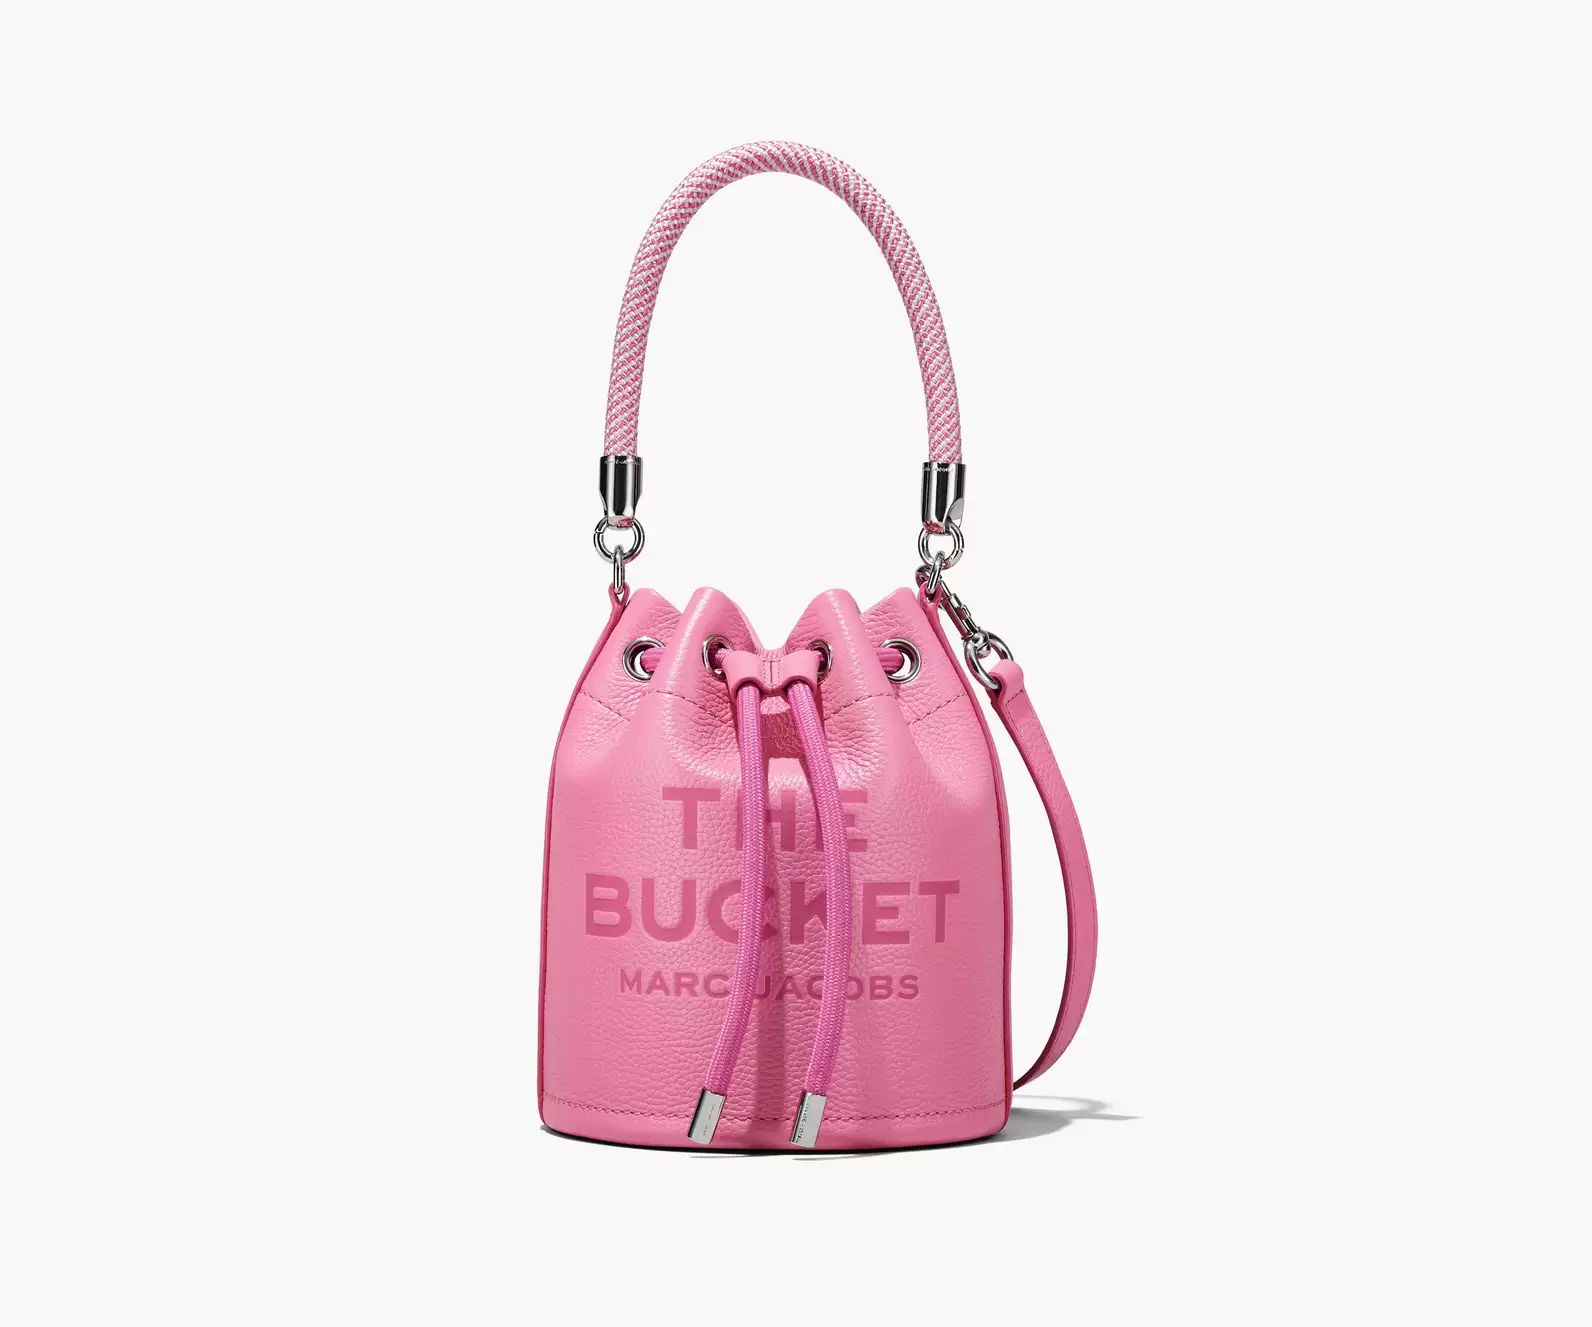 The Leather Bucket Bag | Marc Jacobs